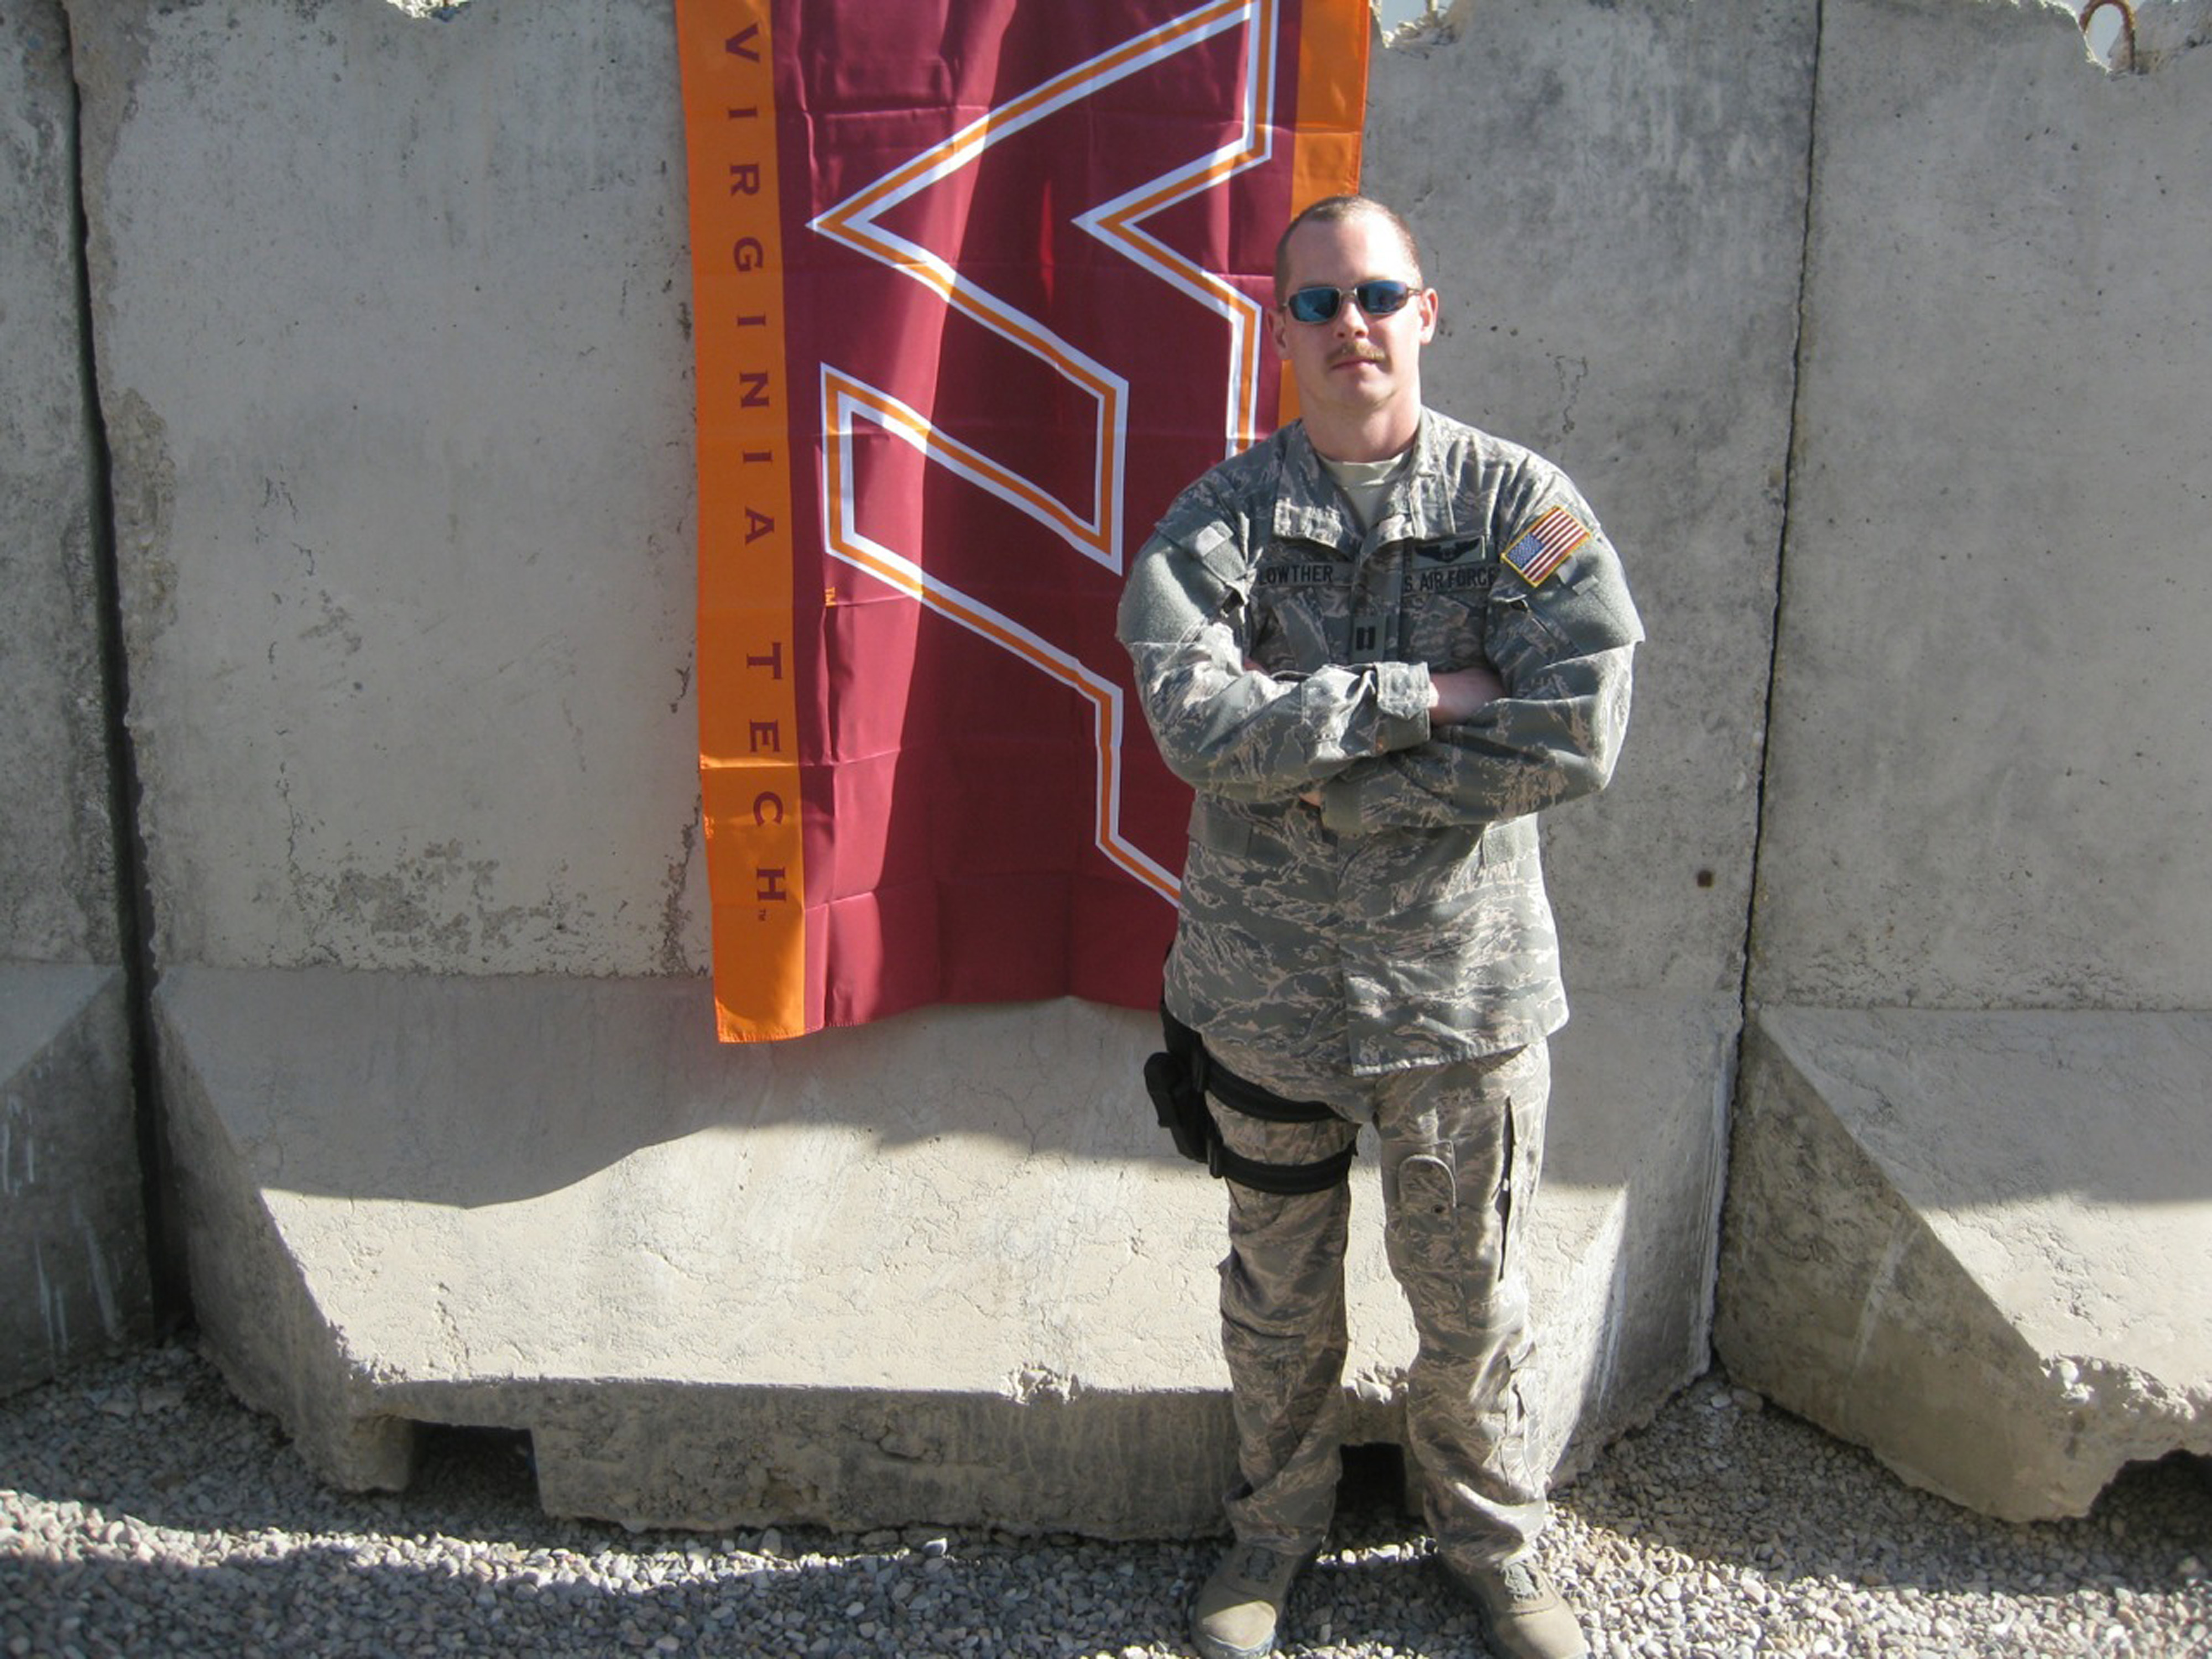 Capt. Patrick Lowther, U.S. Air Force, Virginia Tech Corps of Cadets Class of 2005 shown in Afghanistan